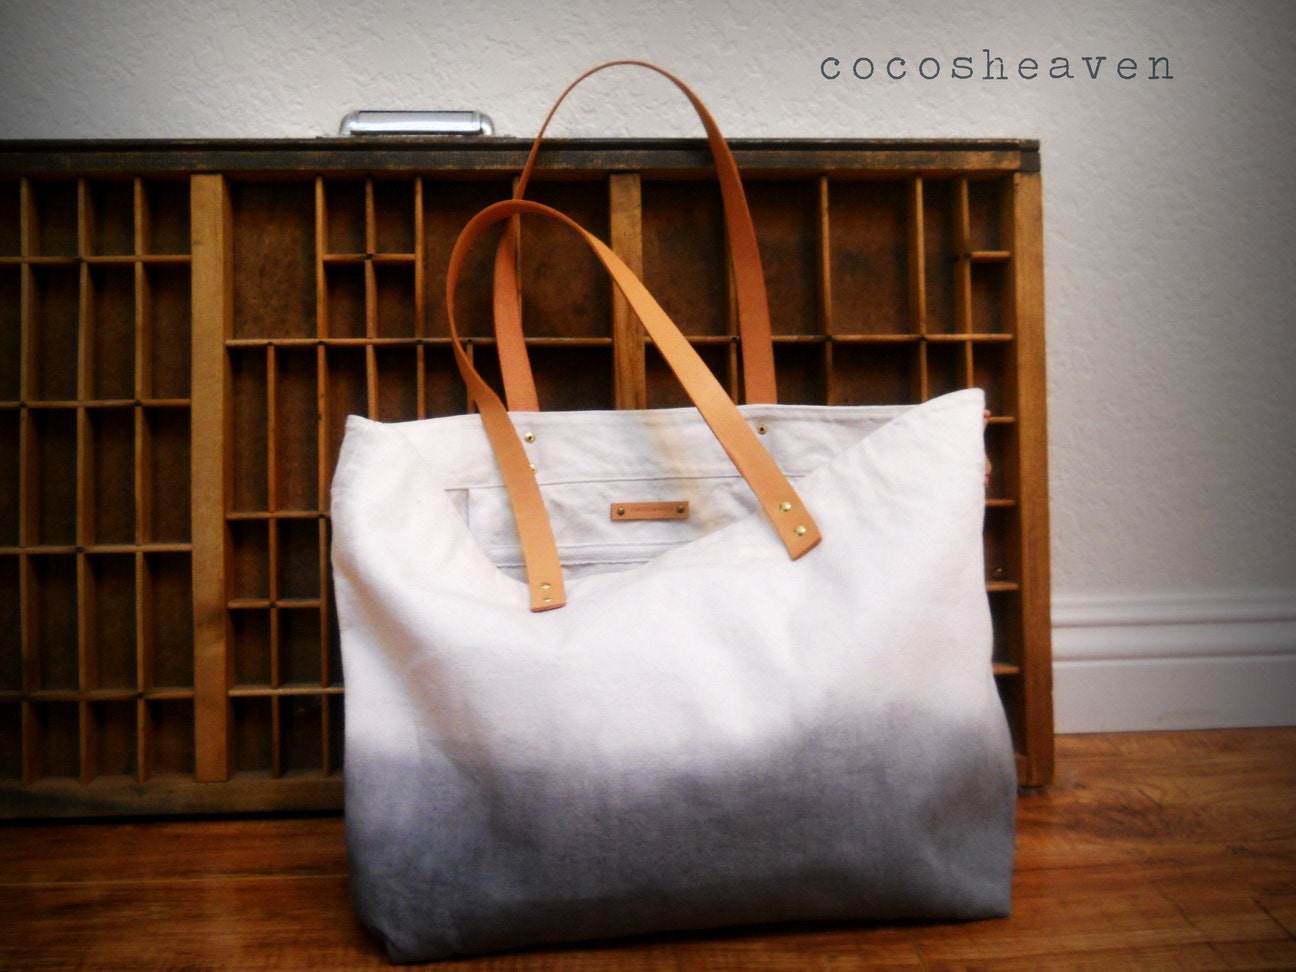 CANVAS TOTE mediakits.theygsgroup.com with leather mediakits.theygsgroup.com by cocosheaven